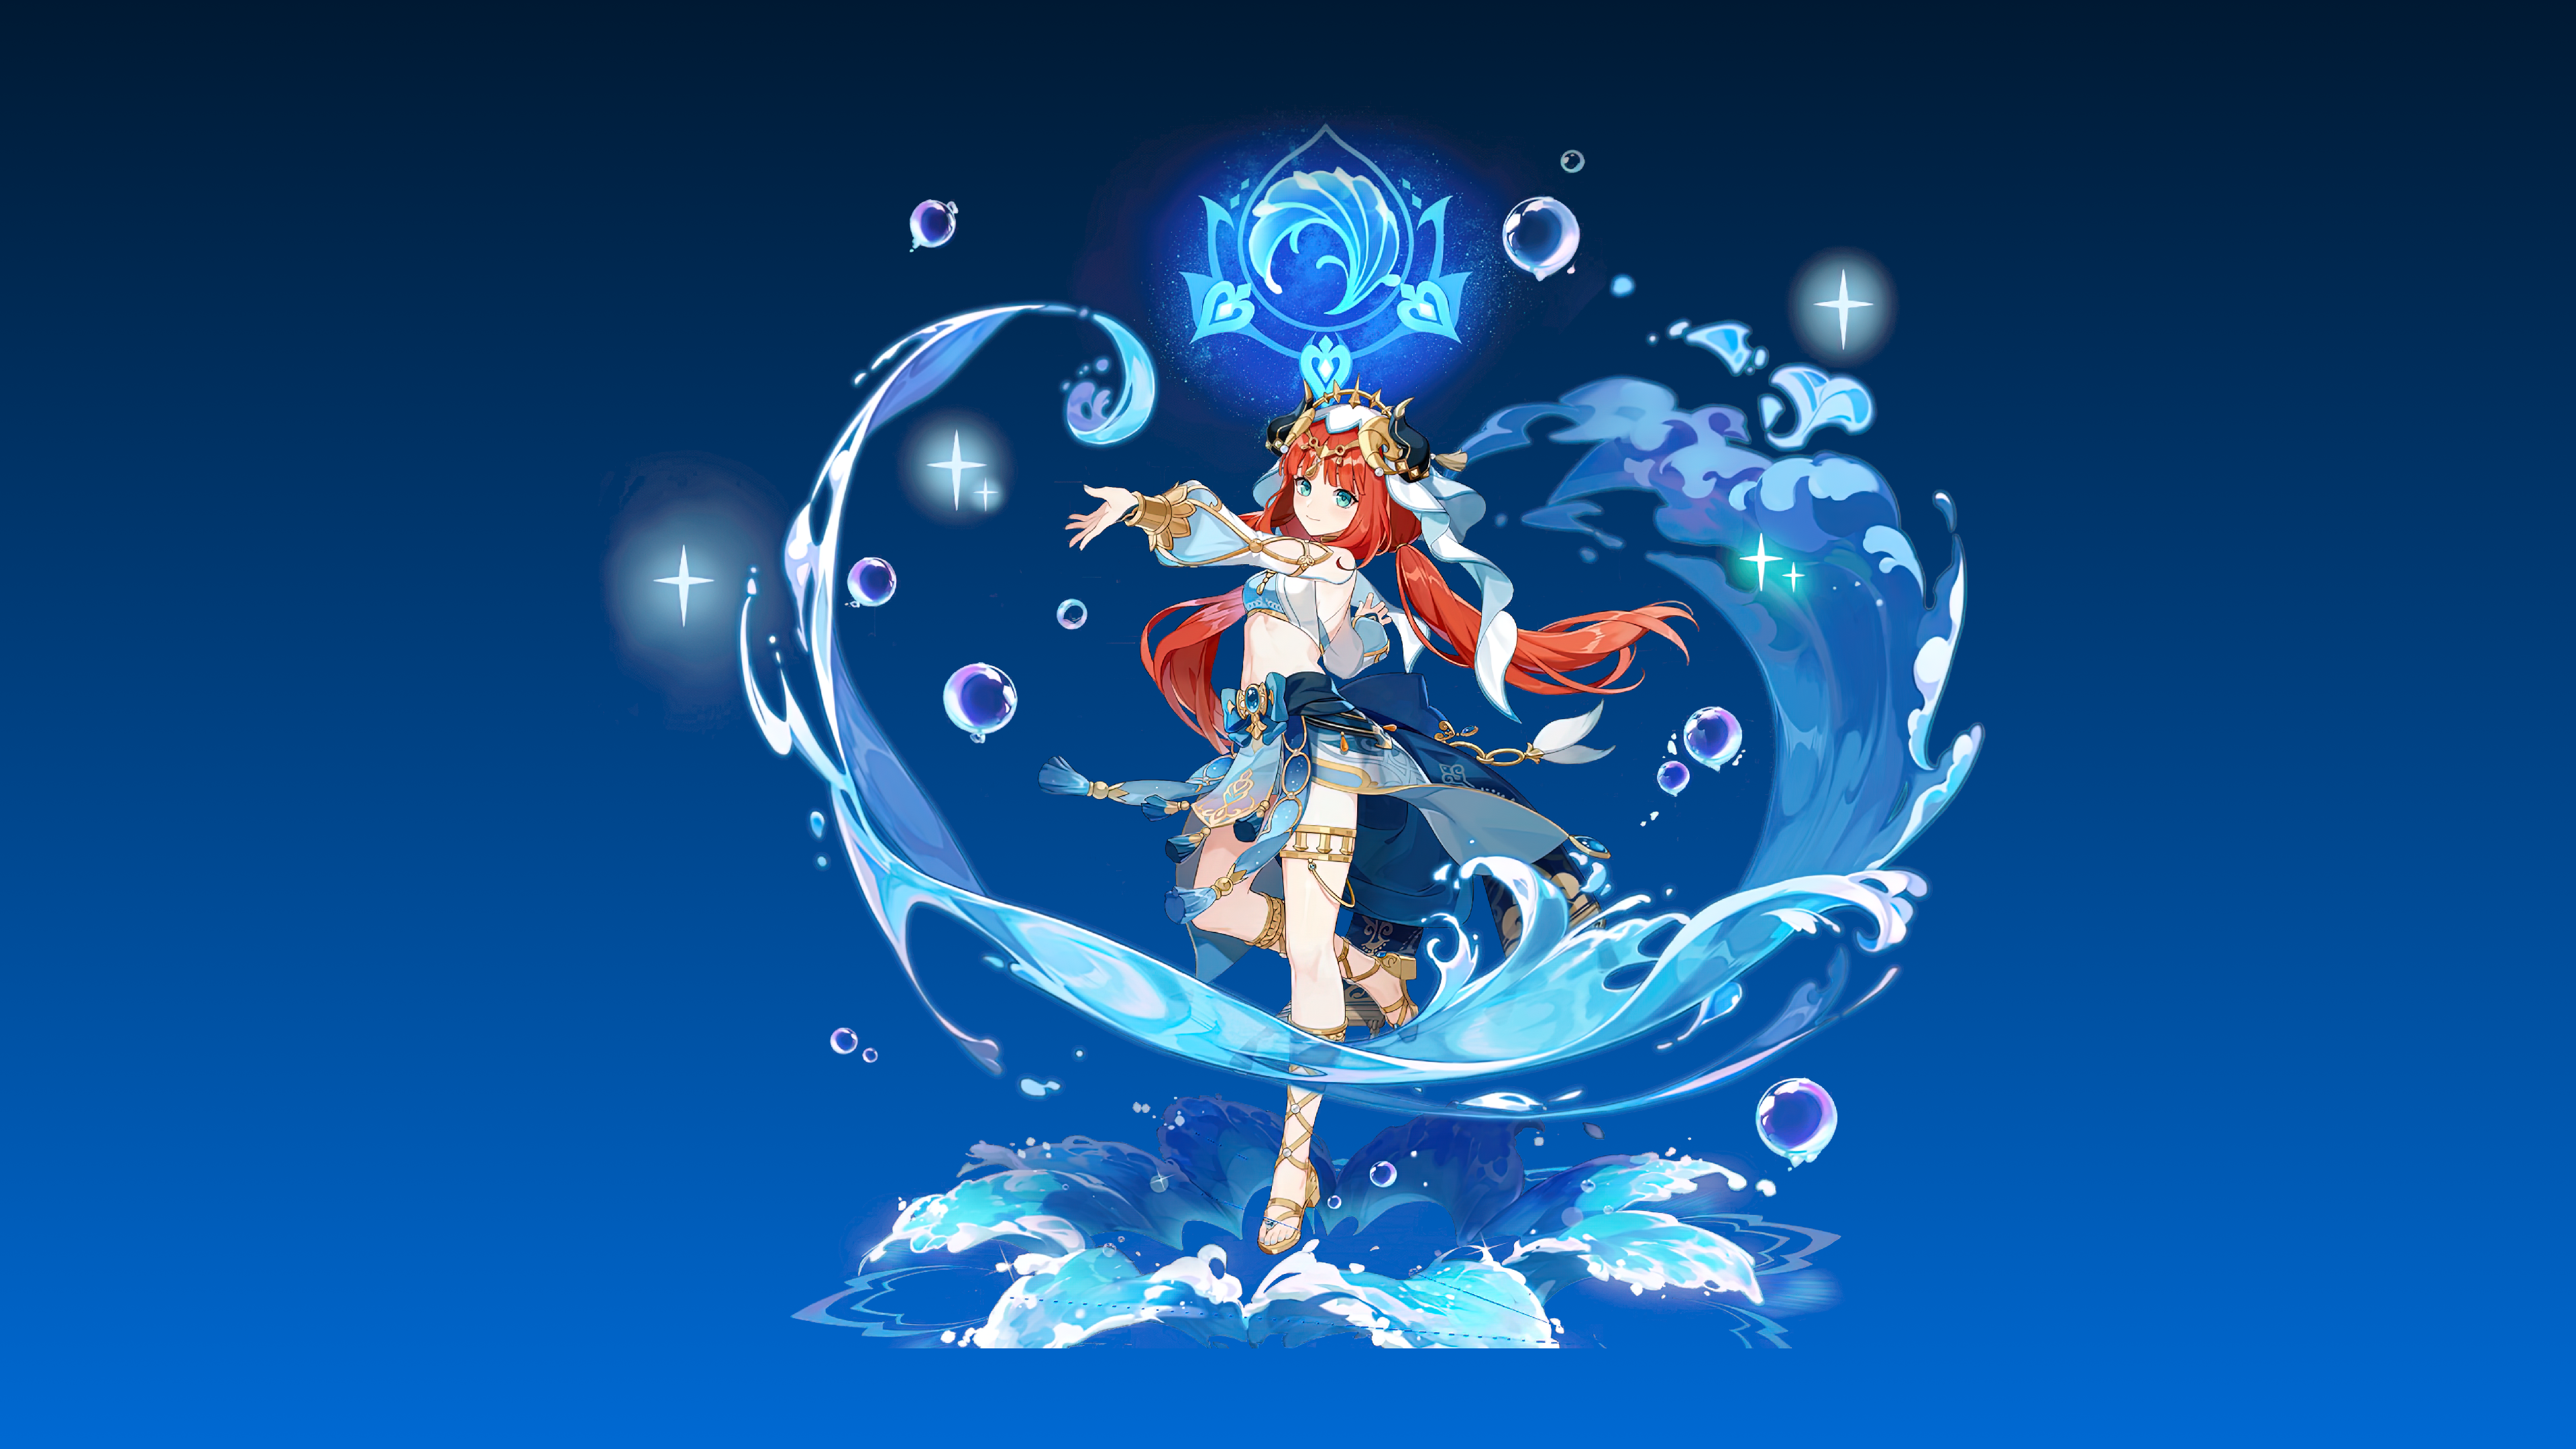 Anime 3840x2160 Nilou (Genshin Impact) Genshin Impact video games video game characters video game girls anime girls redhead simple background minimalism water blue background